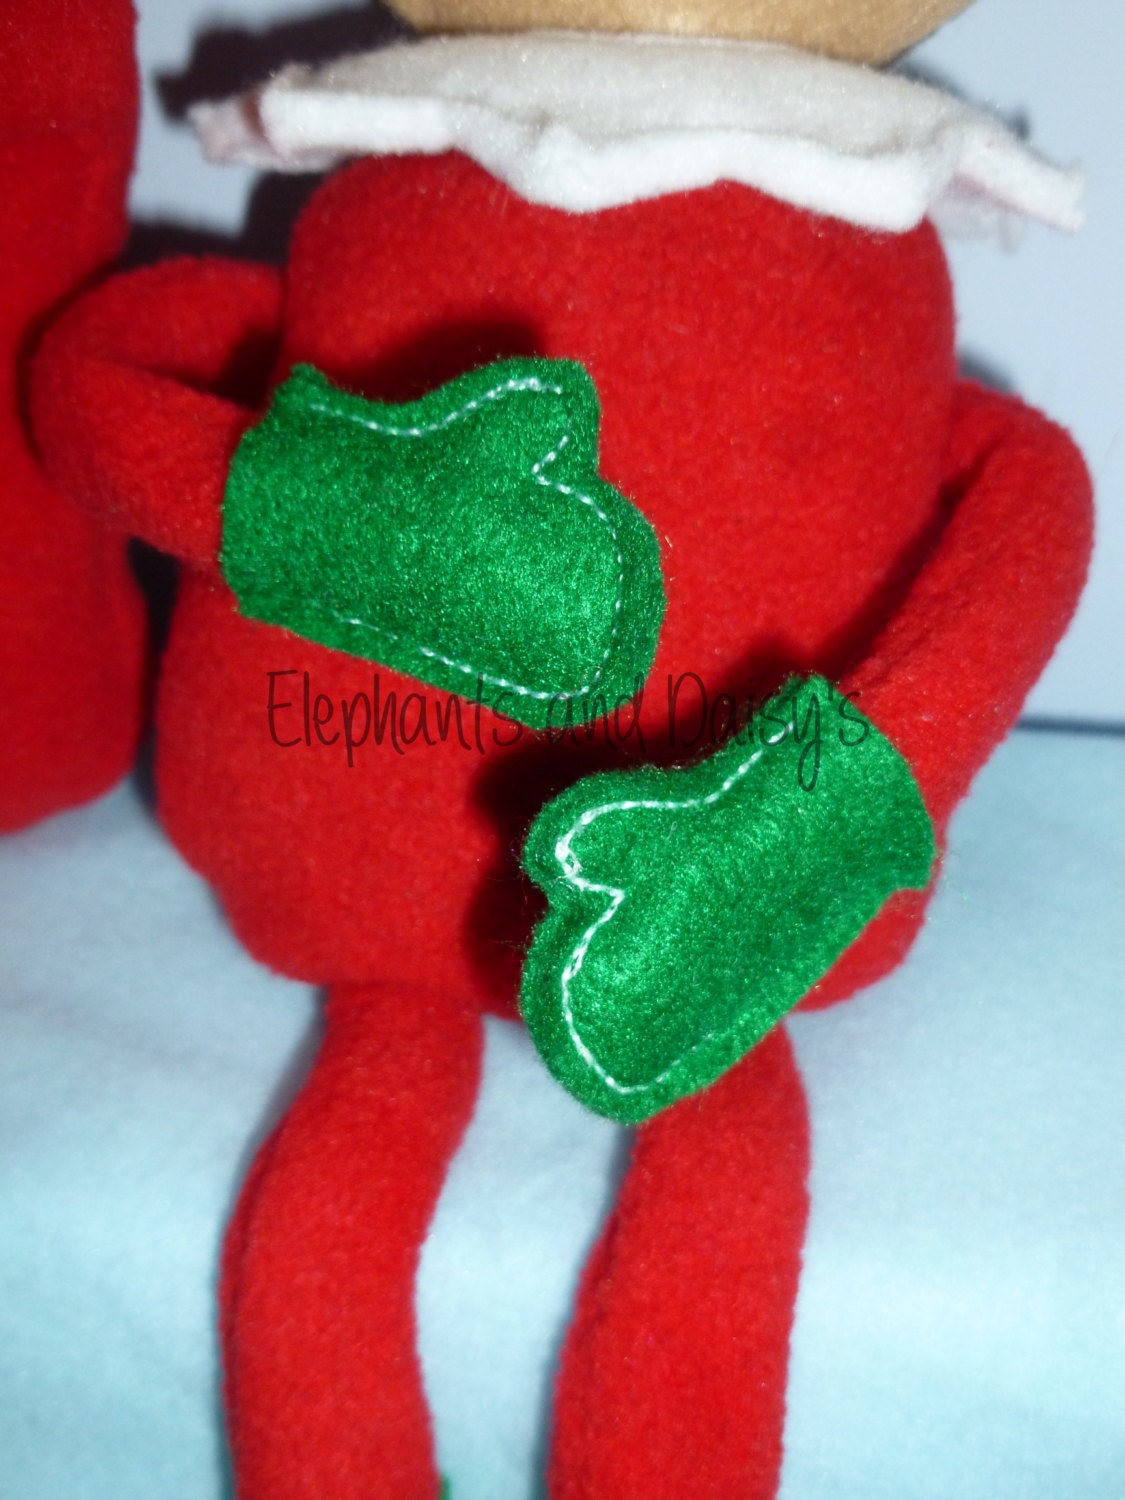 Elf Mittens Embroidery design file by ElephantsandDaisys on Etsy